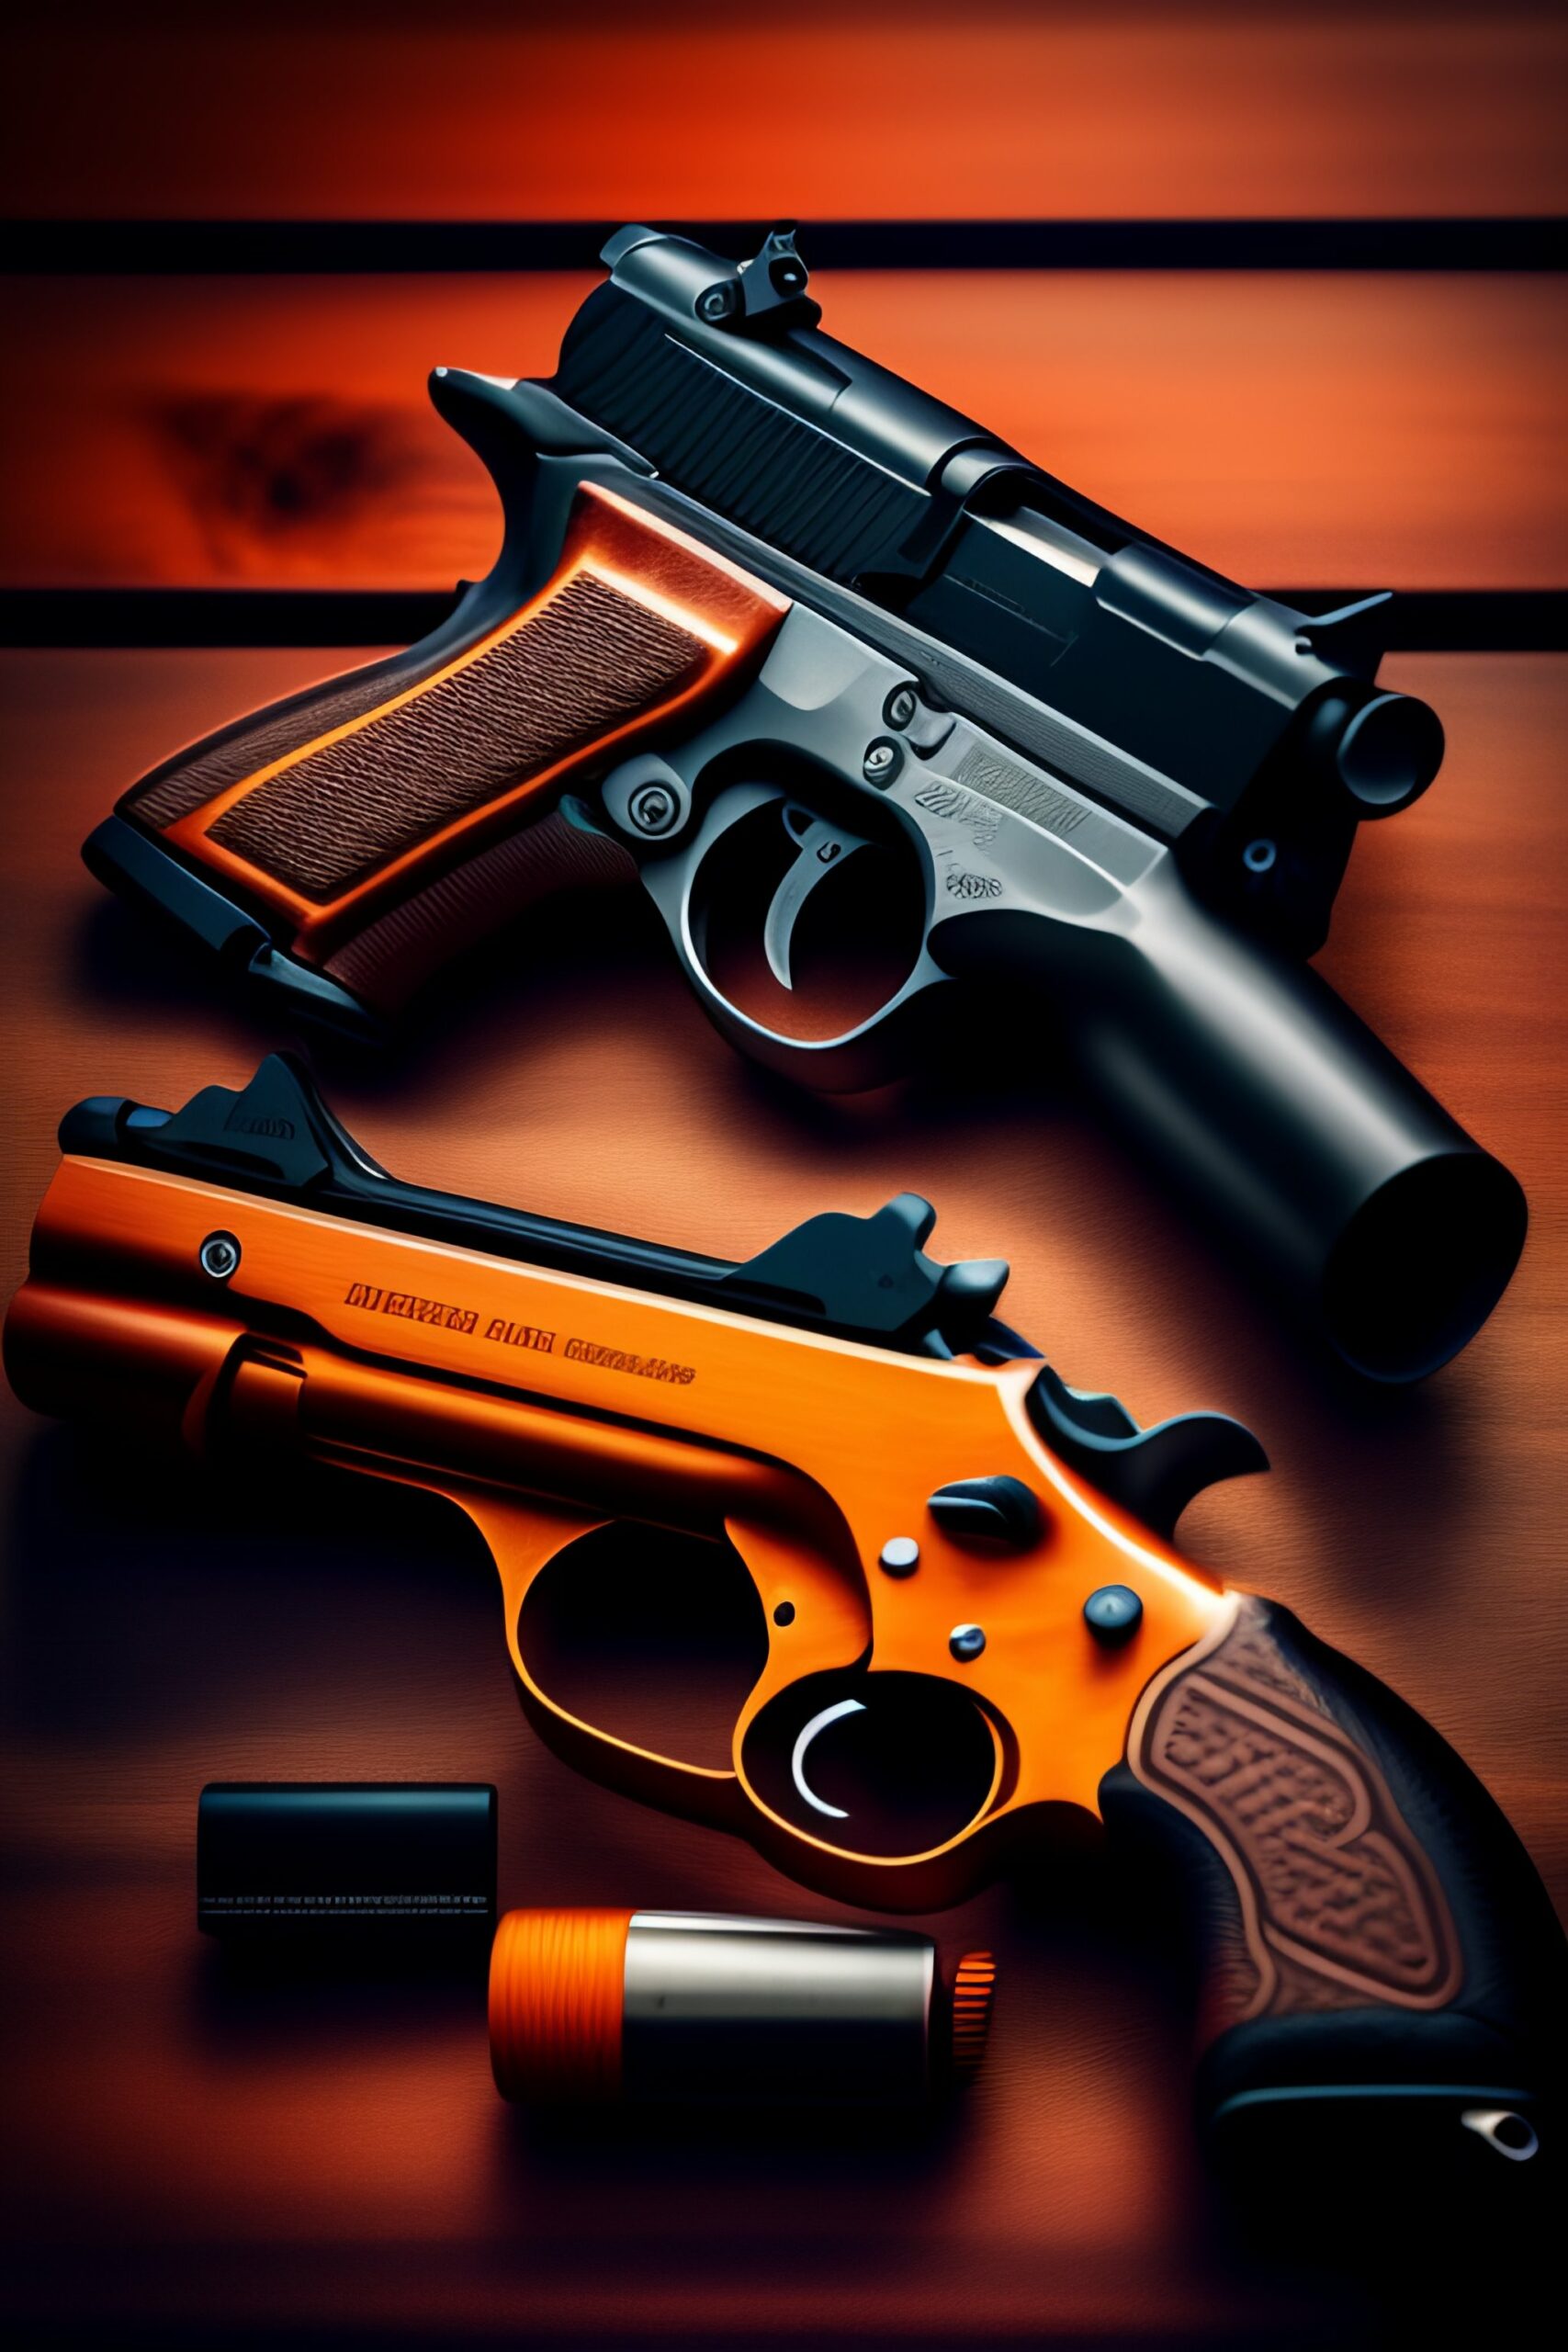 Gun Lovers Blog The Role of Guns in Society A Look at the Facts